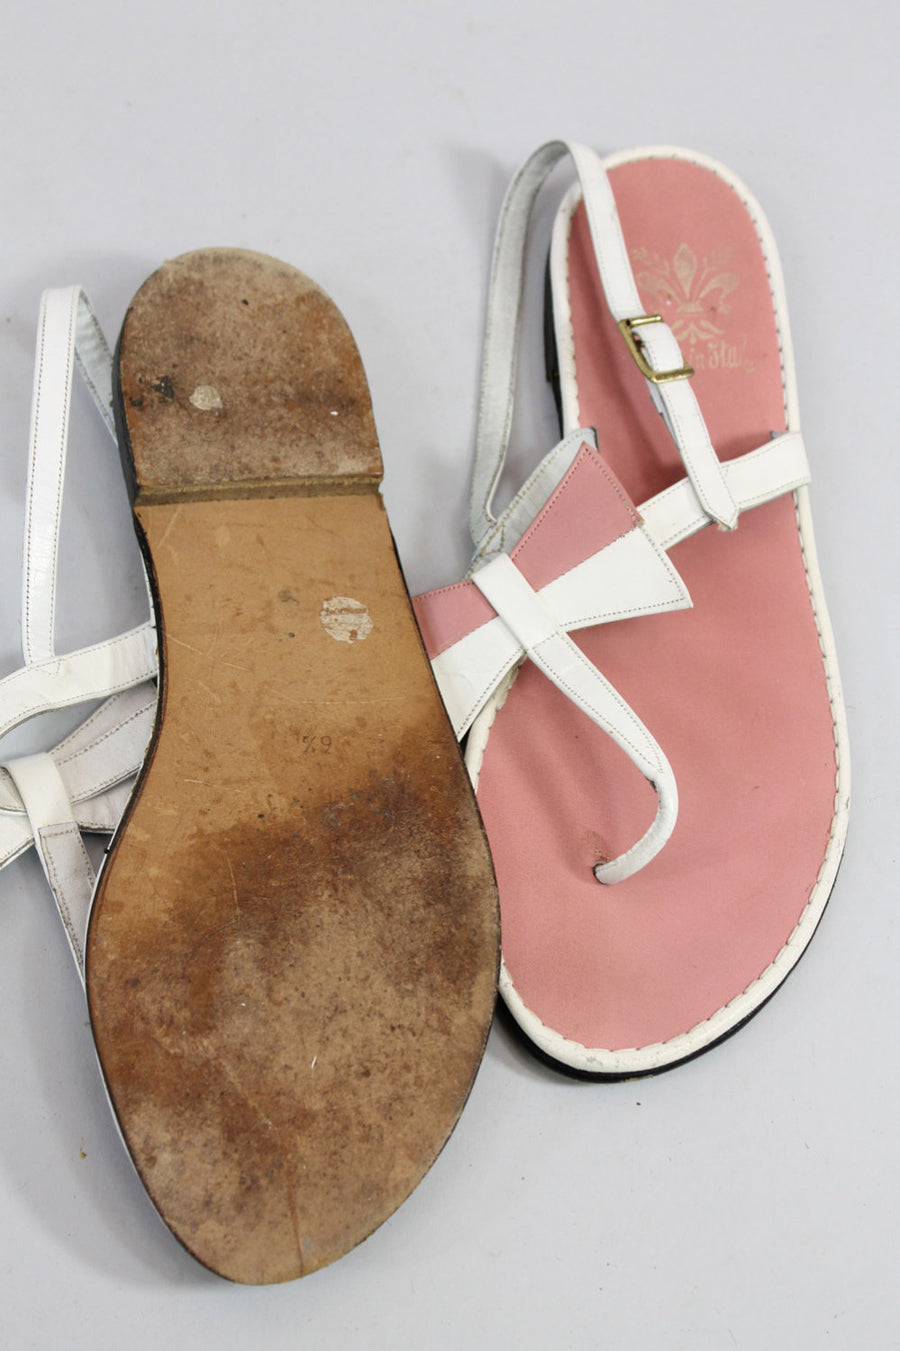 1970s Italian bow sandals | vintage pink white flats | size 6.5 us